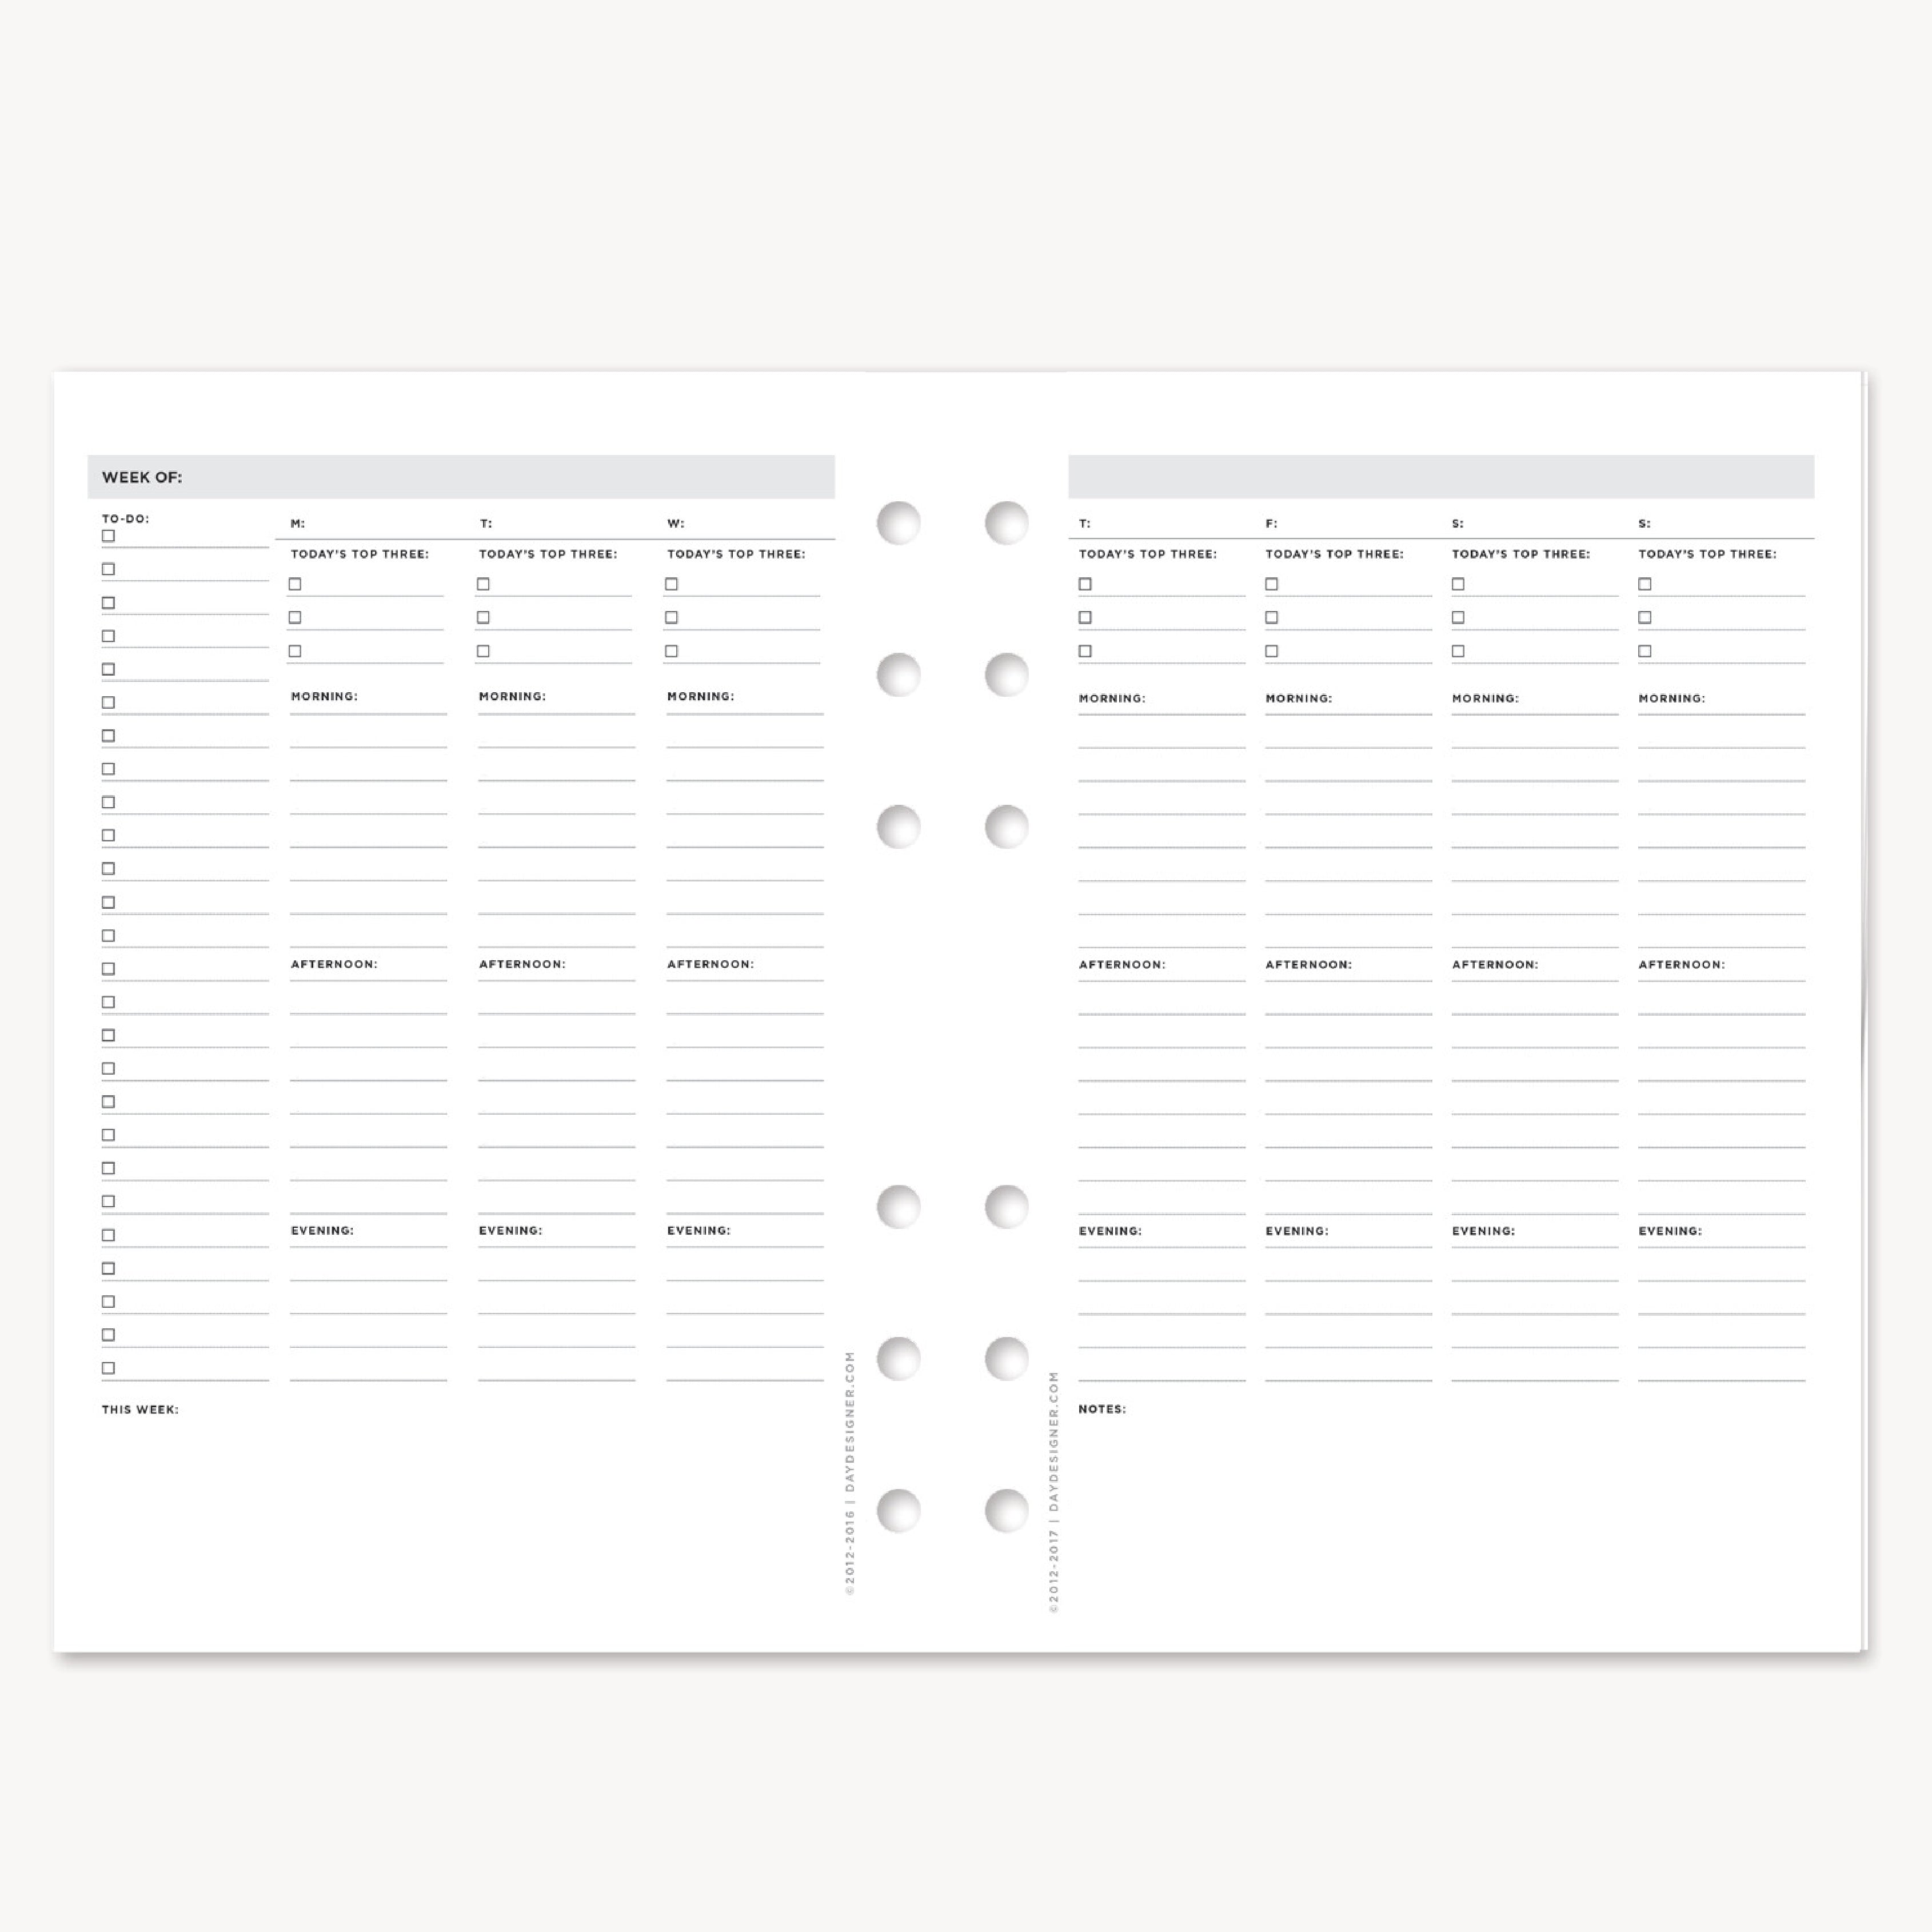 Q2 2024 Daily Planning Pages | A5 Planner | Day Designer